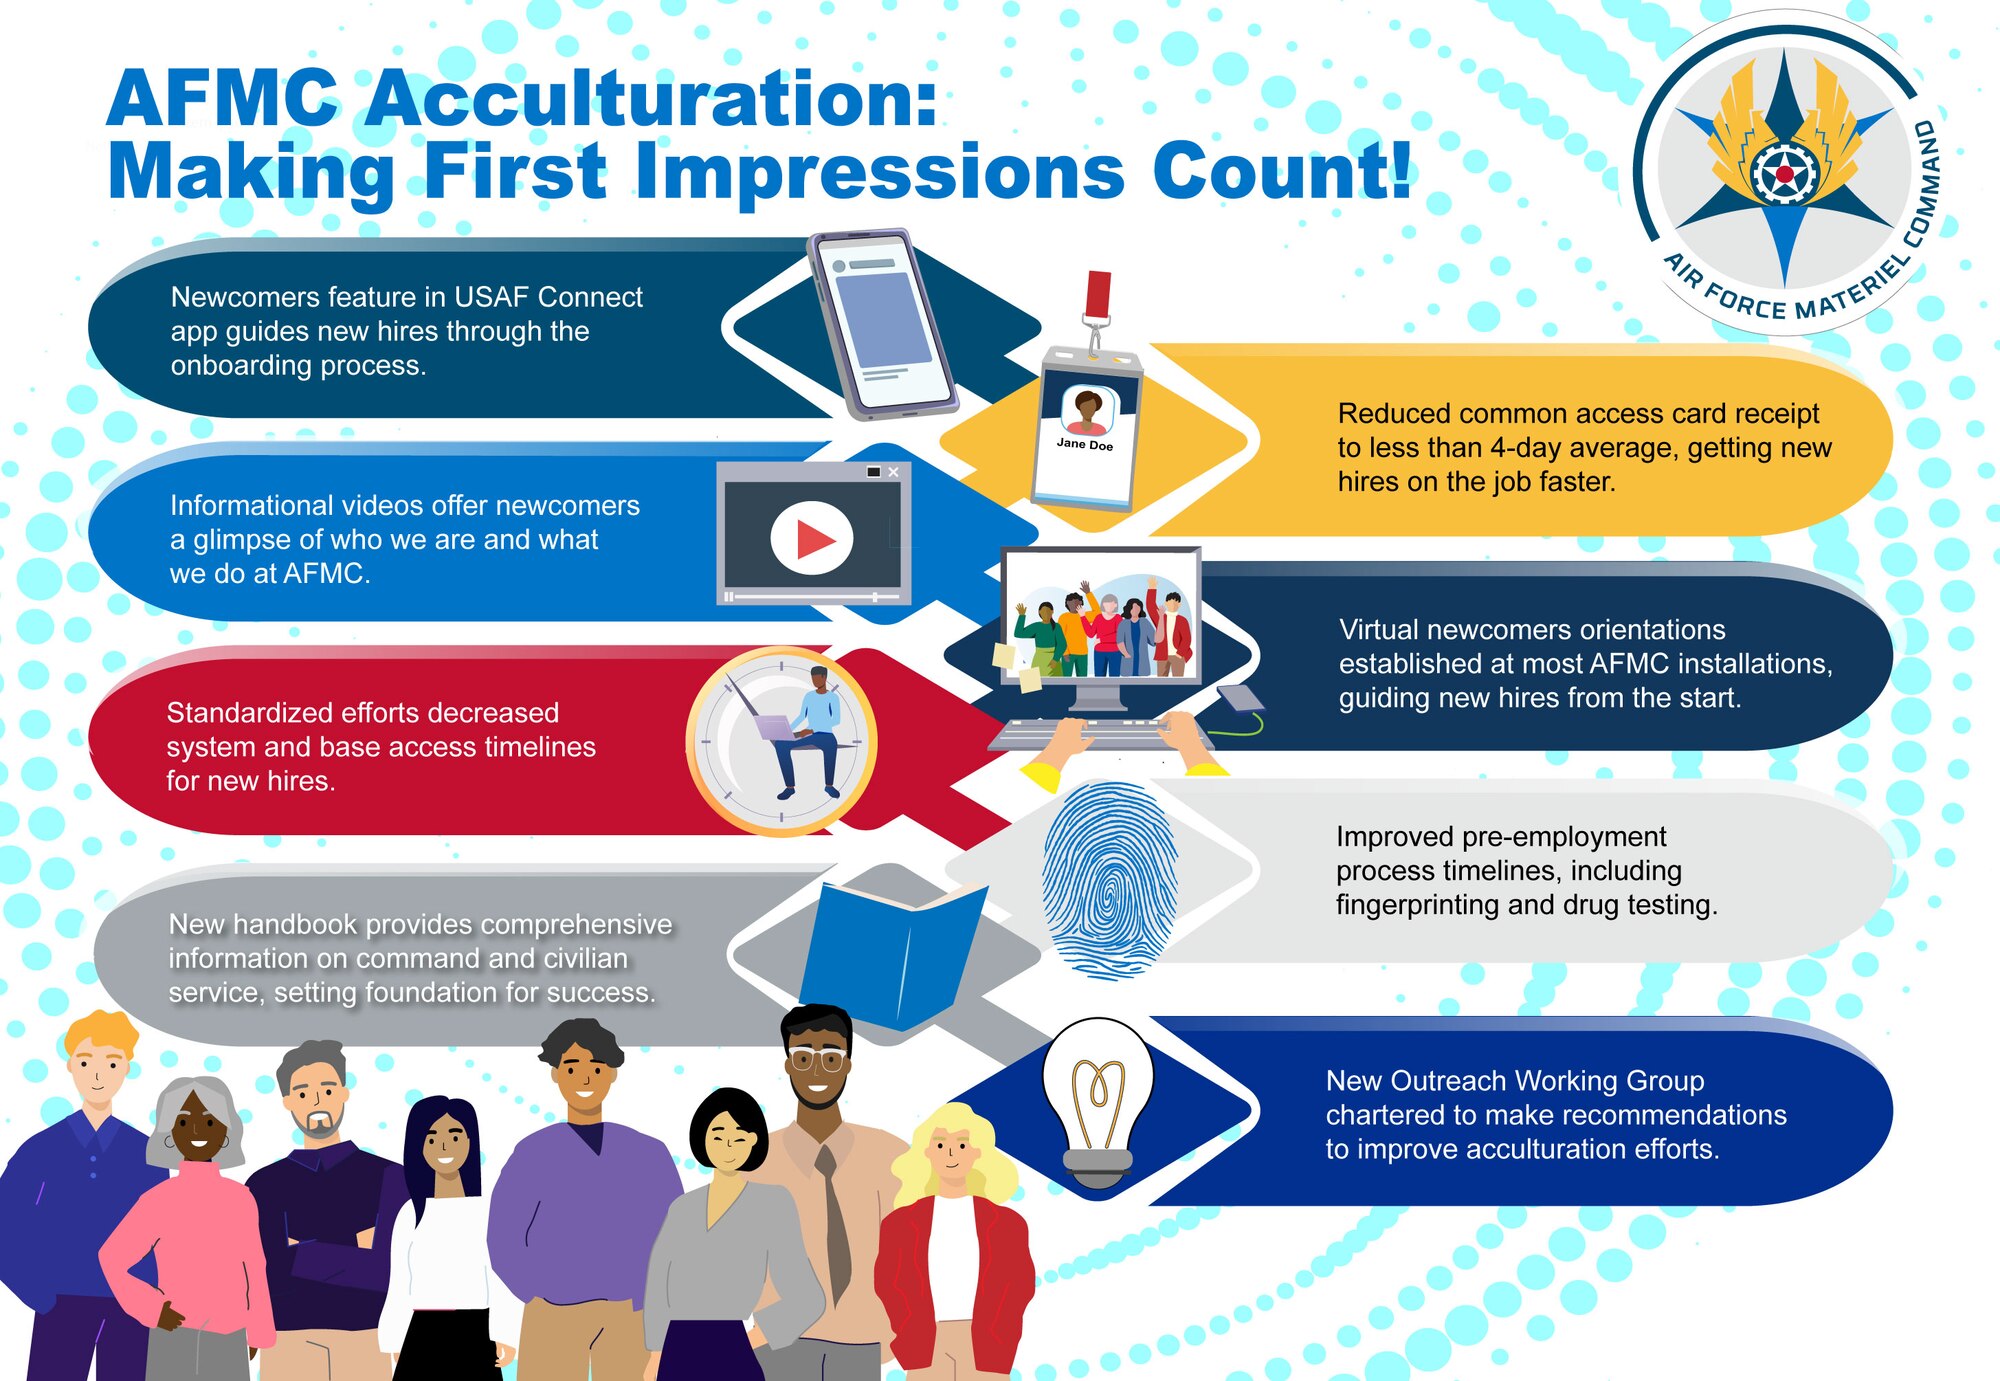 AFMC Acculturation graphic